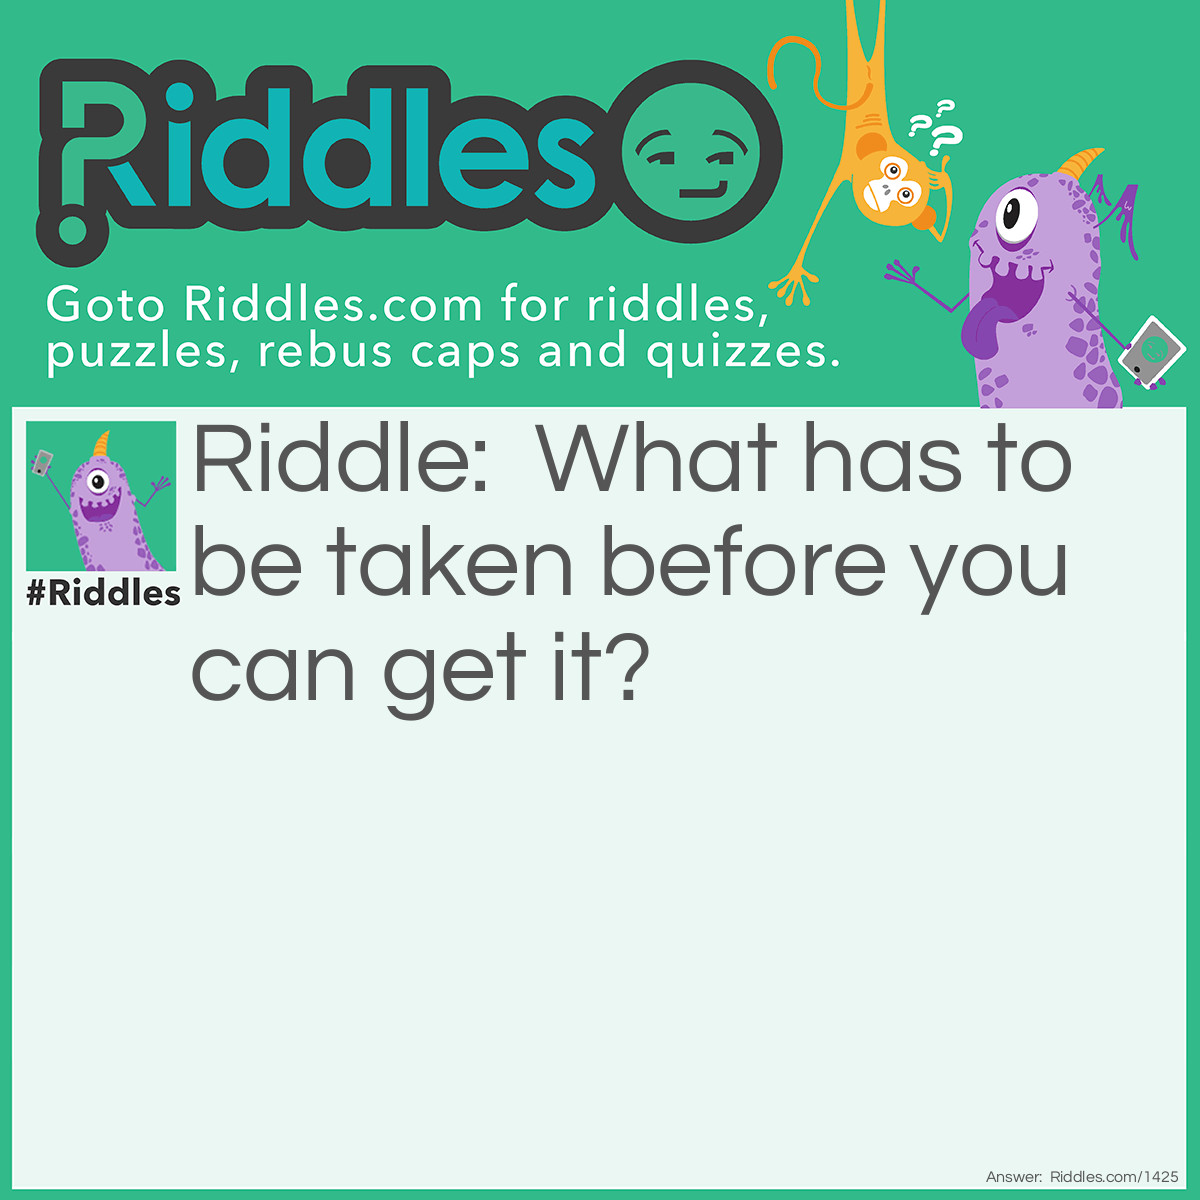 Riddle: What has to be taken before you can get it? Answer: Your picture.